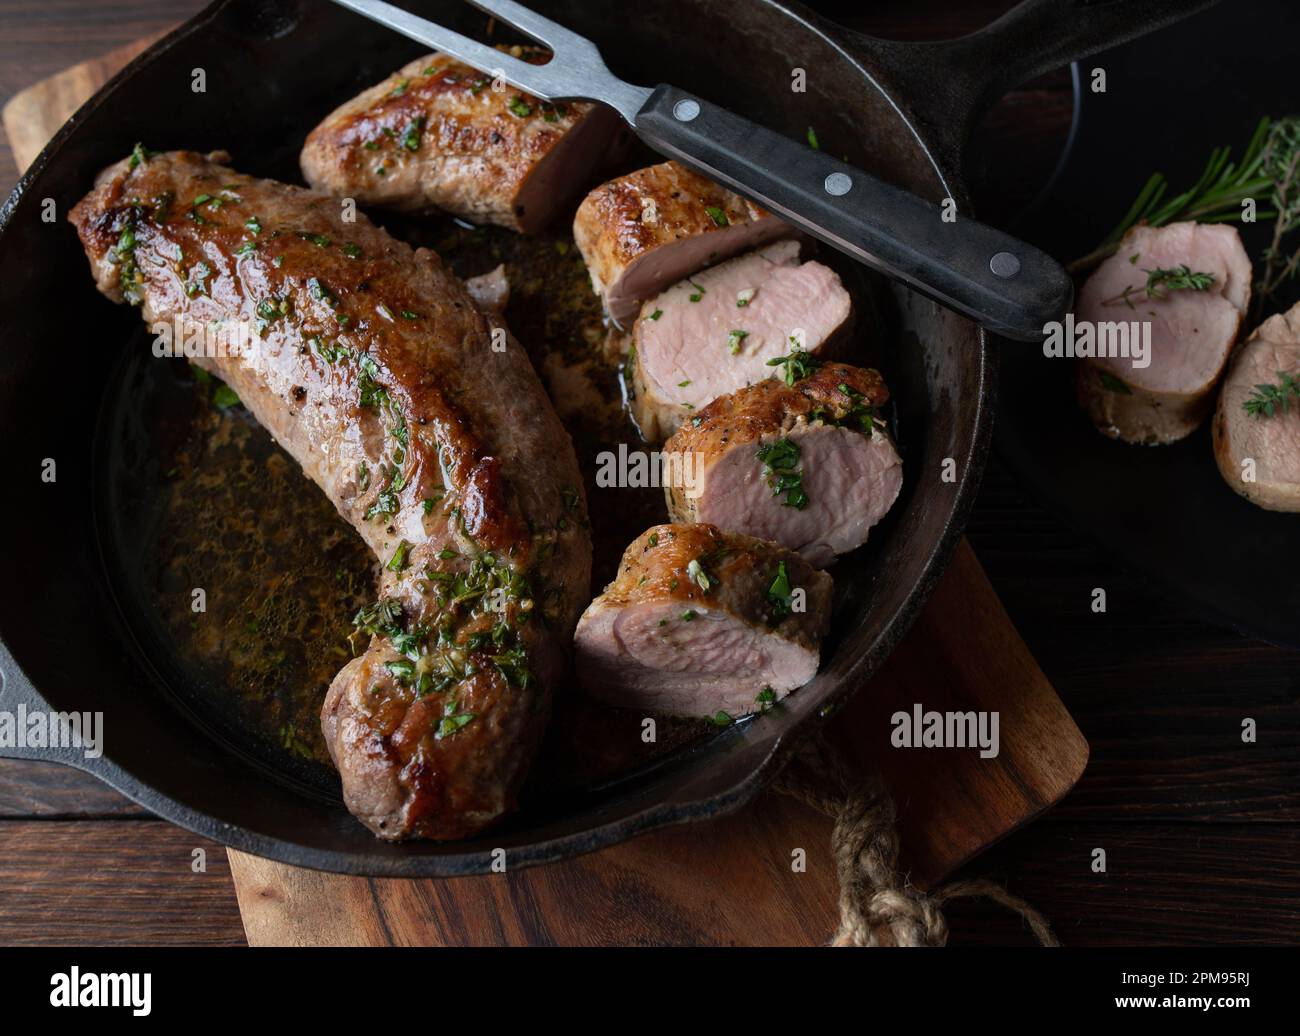 Pork fillet with herb butter in a cast iron pan Stock Photo